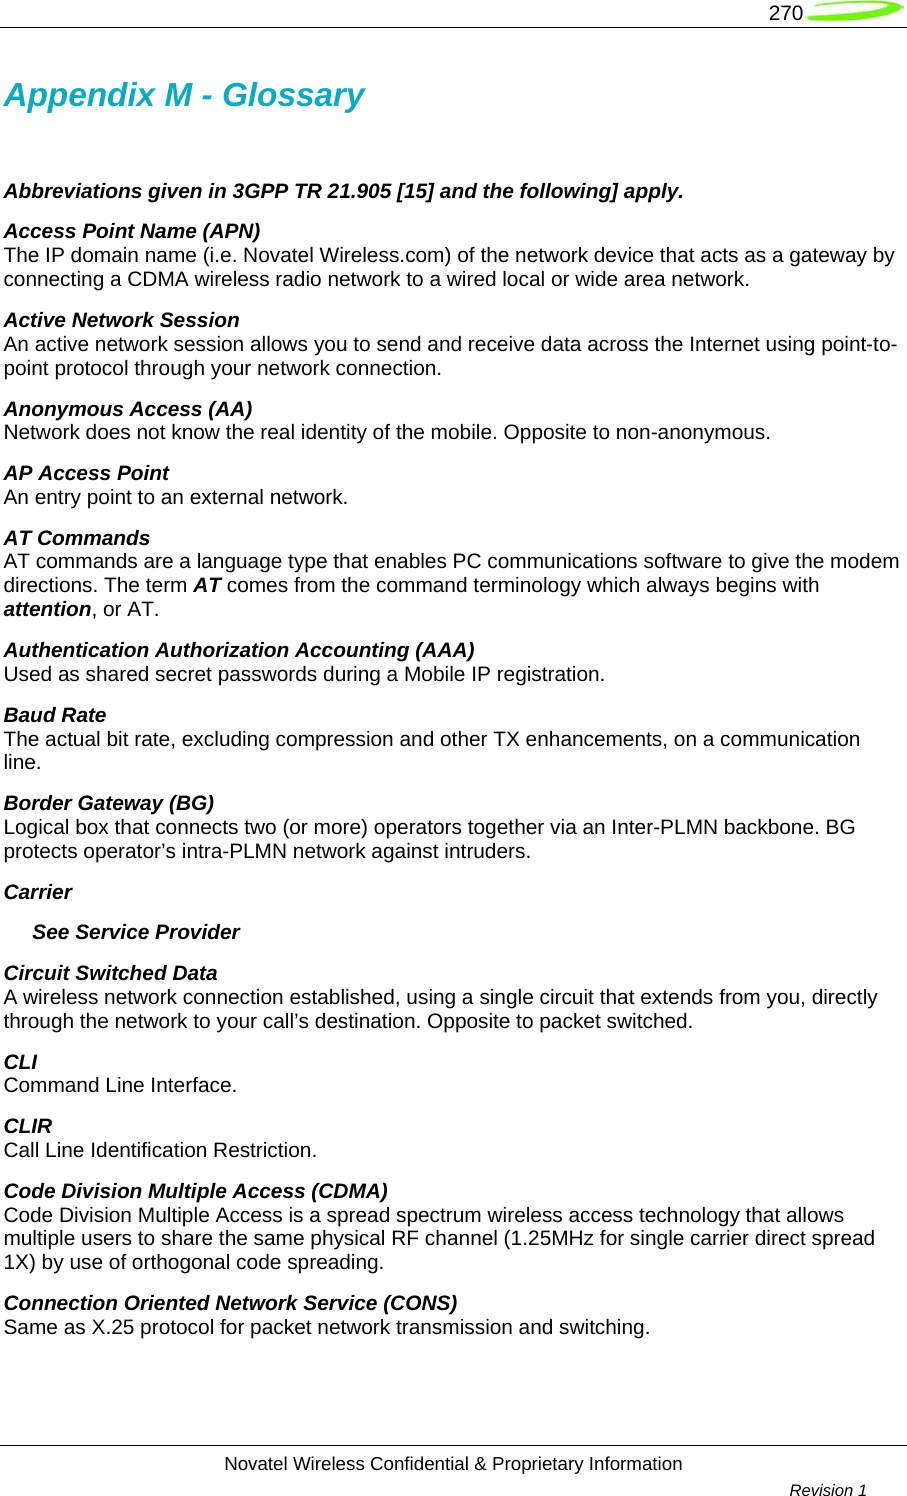   270  Novatel Wireless Confidential &amp; Proprietary Information        Revision 1   Appendix M - Glossary  Abbreviations given in 3GPP TR 21.905 [15] and the following] apply. Access Point Name (APN) The IP domain name (i.e. Novatel Wireless.com) of the network device that acts as a gateway by connecting a CDMA wireless radio network to a wired local or wide area network. Active Network Session An active network session allows you to send and receive data across the Internet using point-to-point protocol through your network connection. Anonymous Access (AA) Network does not know the real identity of the mobile. Opposite to non-anonymous. AP Access Point An entry point to an external network. AT Commands AT commands are a language type that enables PC communications software to give the modem directions. The term AT comes from the command terminology which always begins with attention, or AT. Authentication Authorization Accounting (AAA) Used as shared secret passwords during a Mobile IP registration. Baud Rate The actual bit rate, excluding compression and other TX enhancements, on a communication line. Border Gateway (BG) Logical box that connects two (or more) operators together via an Inter-PLMN backbone. BG protects operator’s intra-PLMN network against intruders. Carrier      See Service Provider Circuit Switched Data A wireless network connection established, using a single circuit that extends from you, directly through the network to your call’s destination. Opposite to packet switched. CLI Command Line Interface. CLIR  Call Line Identification Restriction. Code Division Multiple Access (CDMA) Code Division Multiple Access is a spread spectrum wireless access technology that allows multiple users to share the same physical RF channel (1.25MHz for single carrier direct spread 1X) by use of orthogonal code spreading. Connection Oriented Network Service (CONS) Same as X.25 protocol for packet network transmission and switching. 